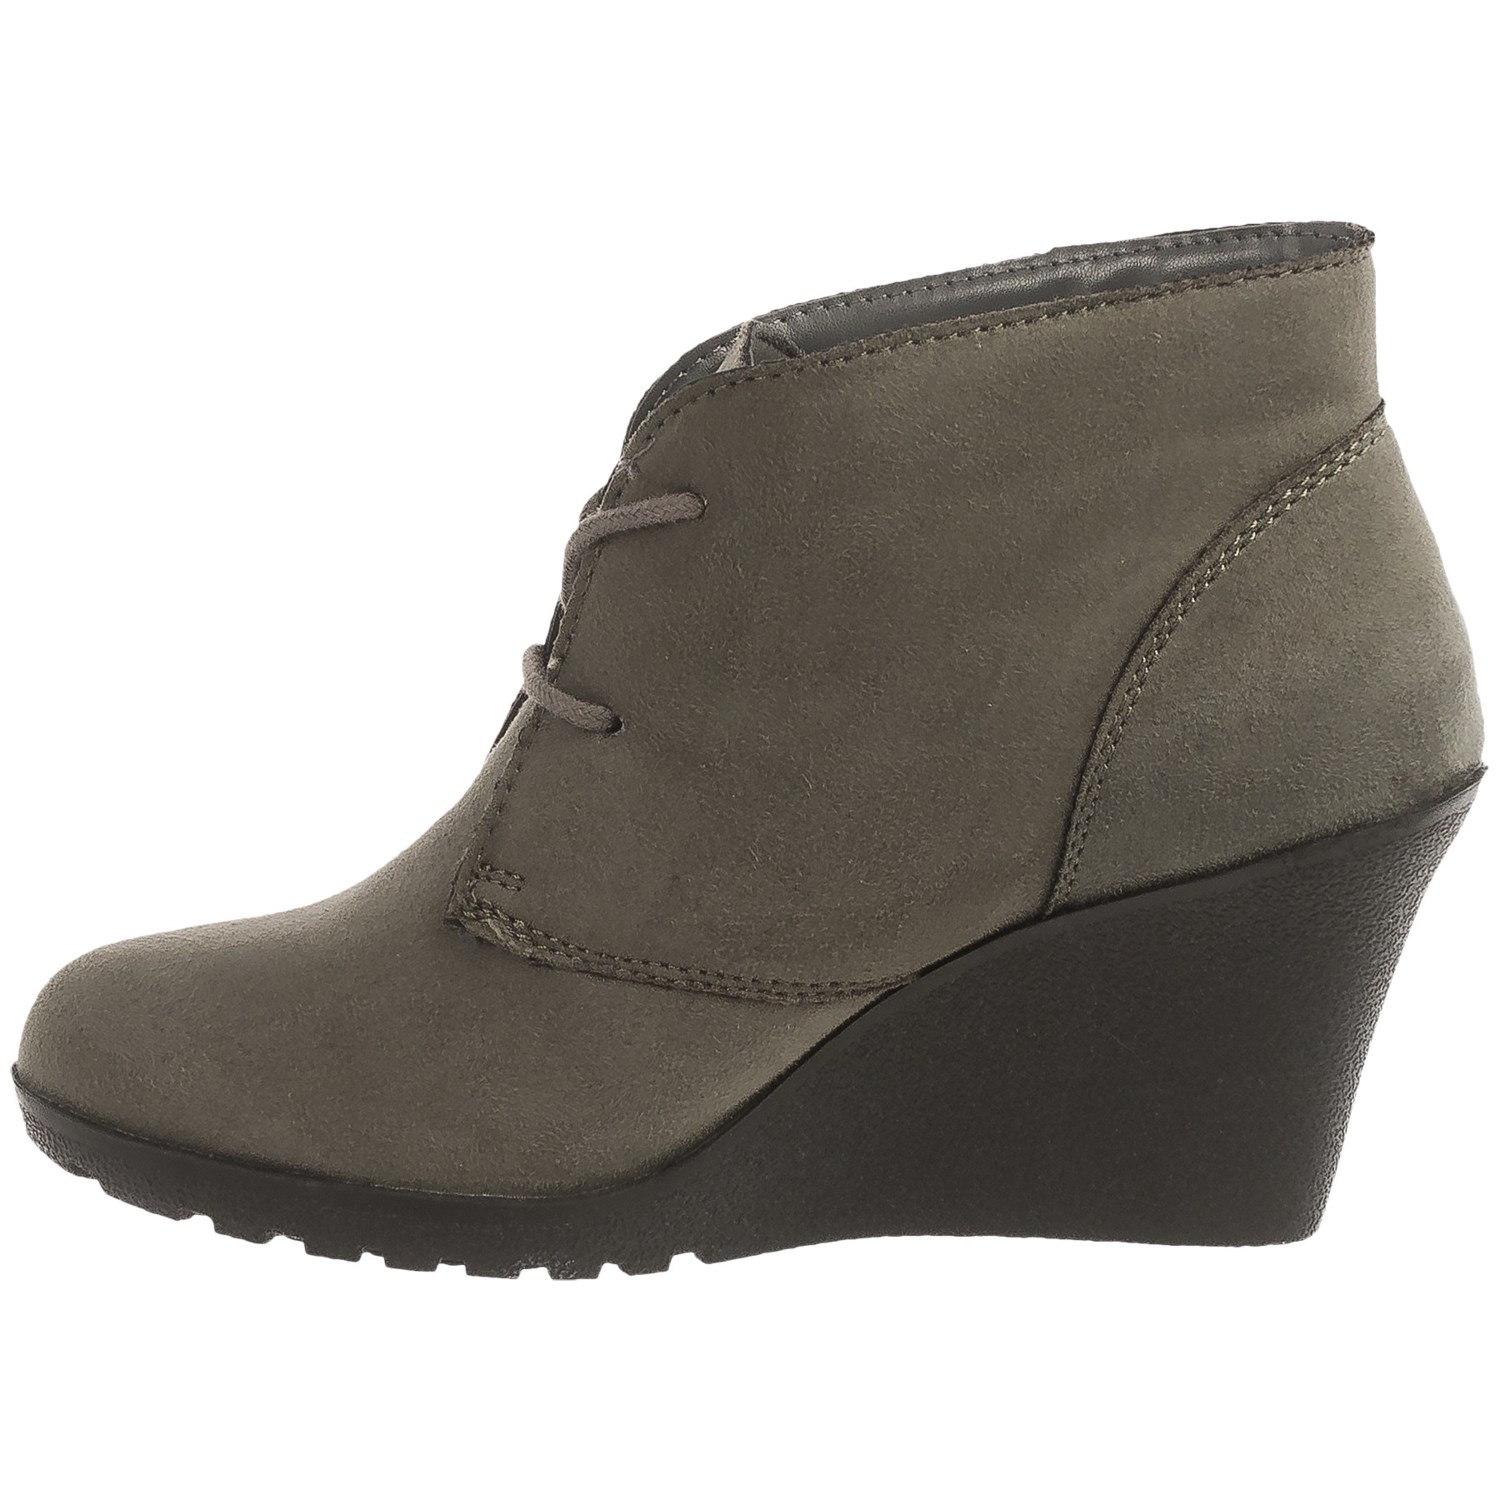 White Mountain Irma Wedge Boots (For Women) - Save 68%